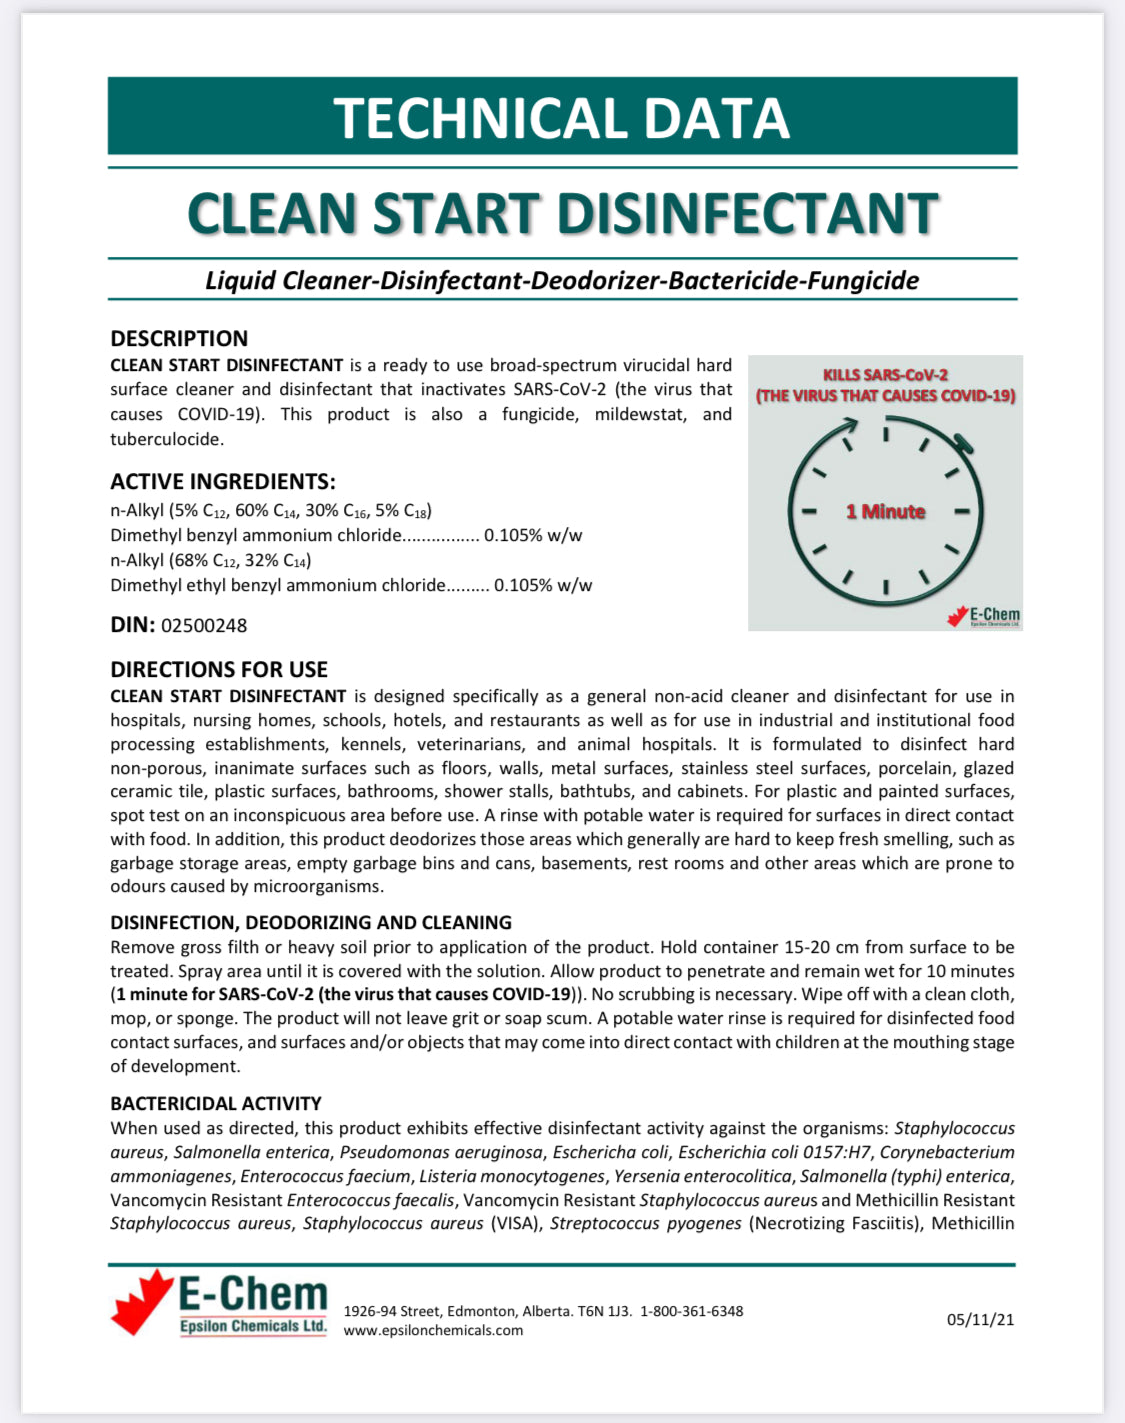 Clean Start Disinfectant